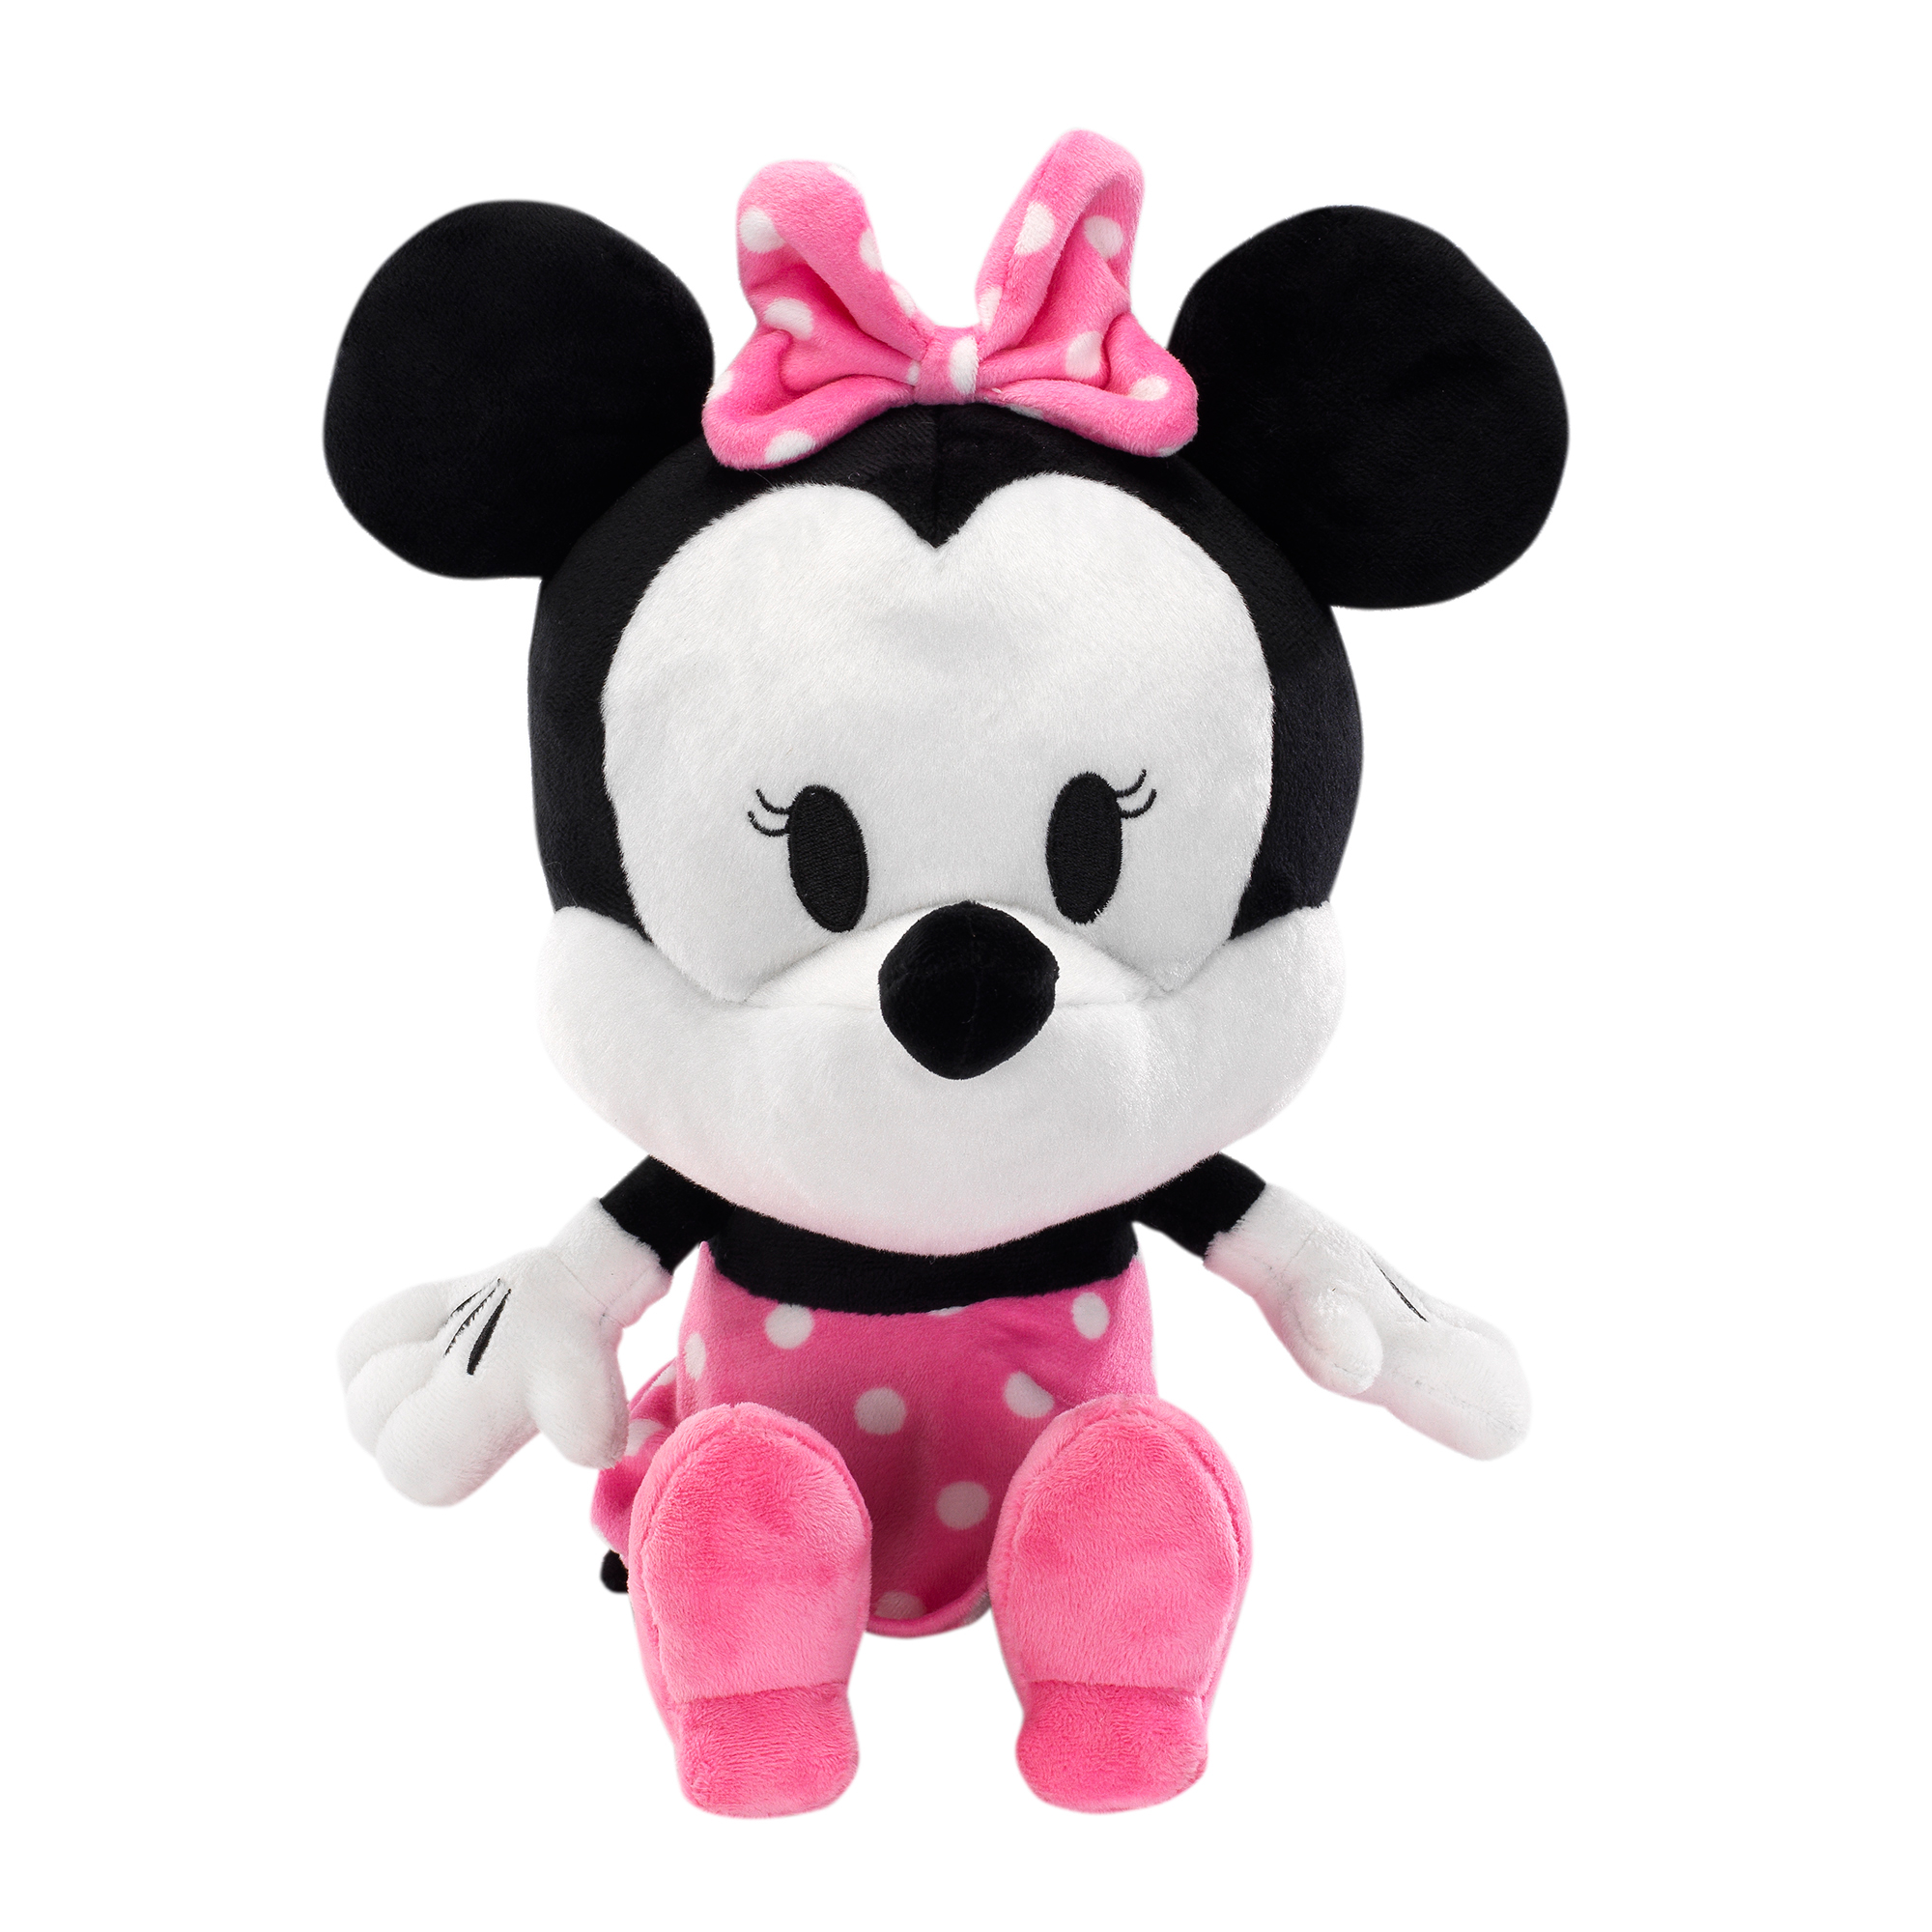 Disney Baby Minnie Mouse Plush Stuffed Animal Toy by Lambs & Ivy - image 2 of 4